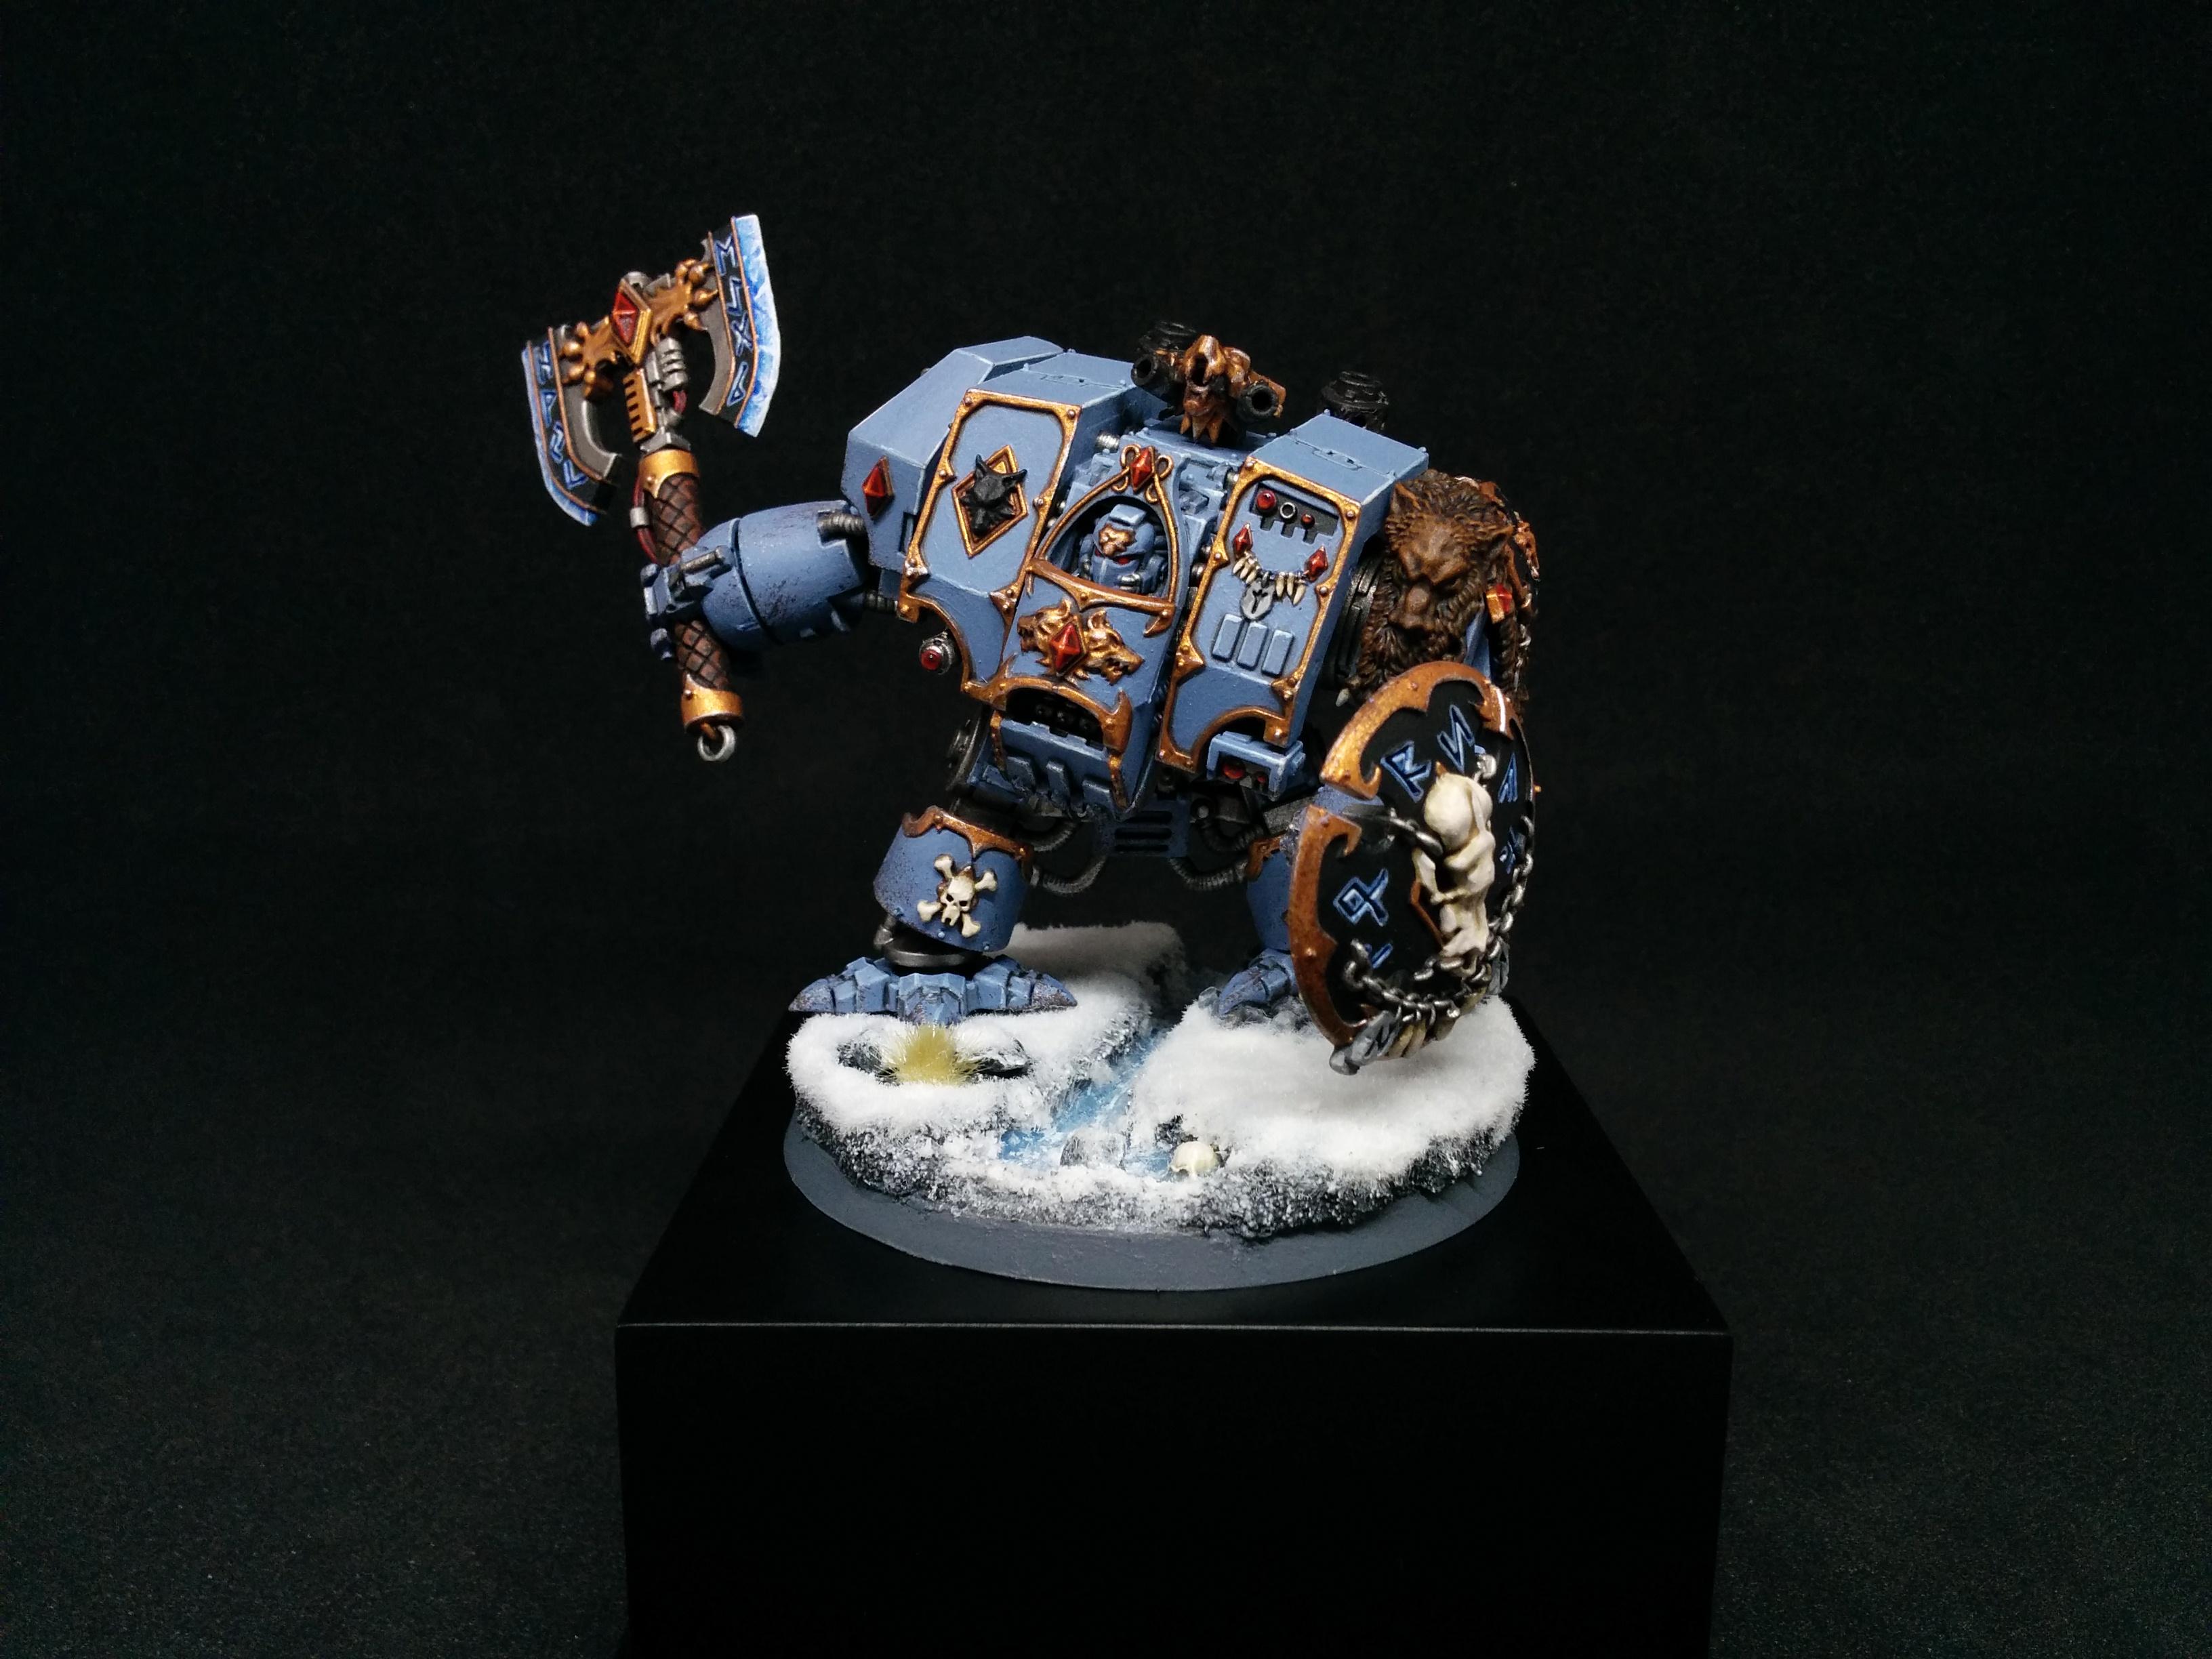 Citadel, Dreadnought, Games Workshop, Miniature, Painting, Space Marines, Space Wolves, Venerable Dreadnought, Warhammer 40,000, Warhammer Fantasy